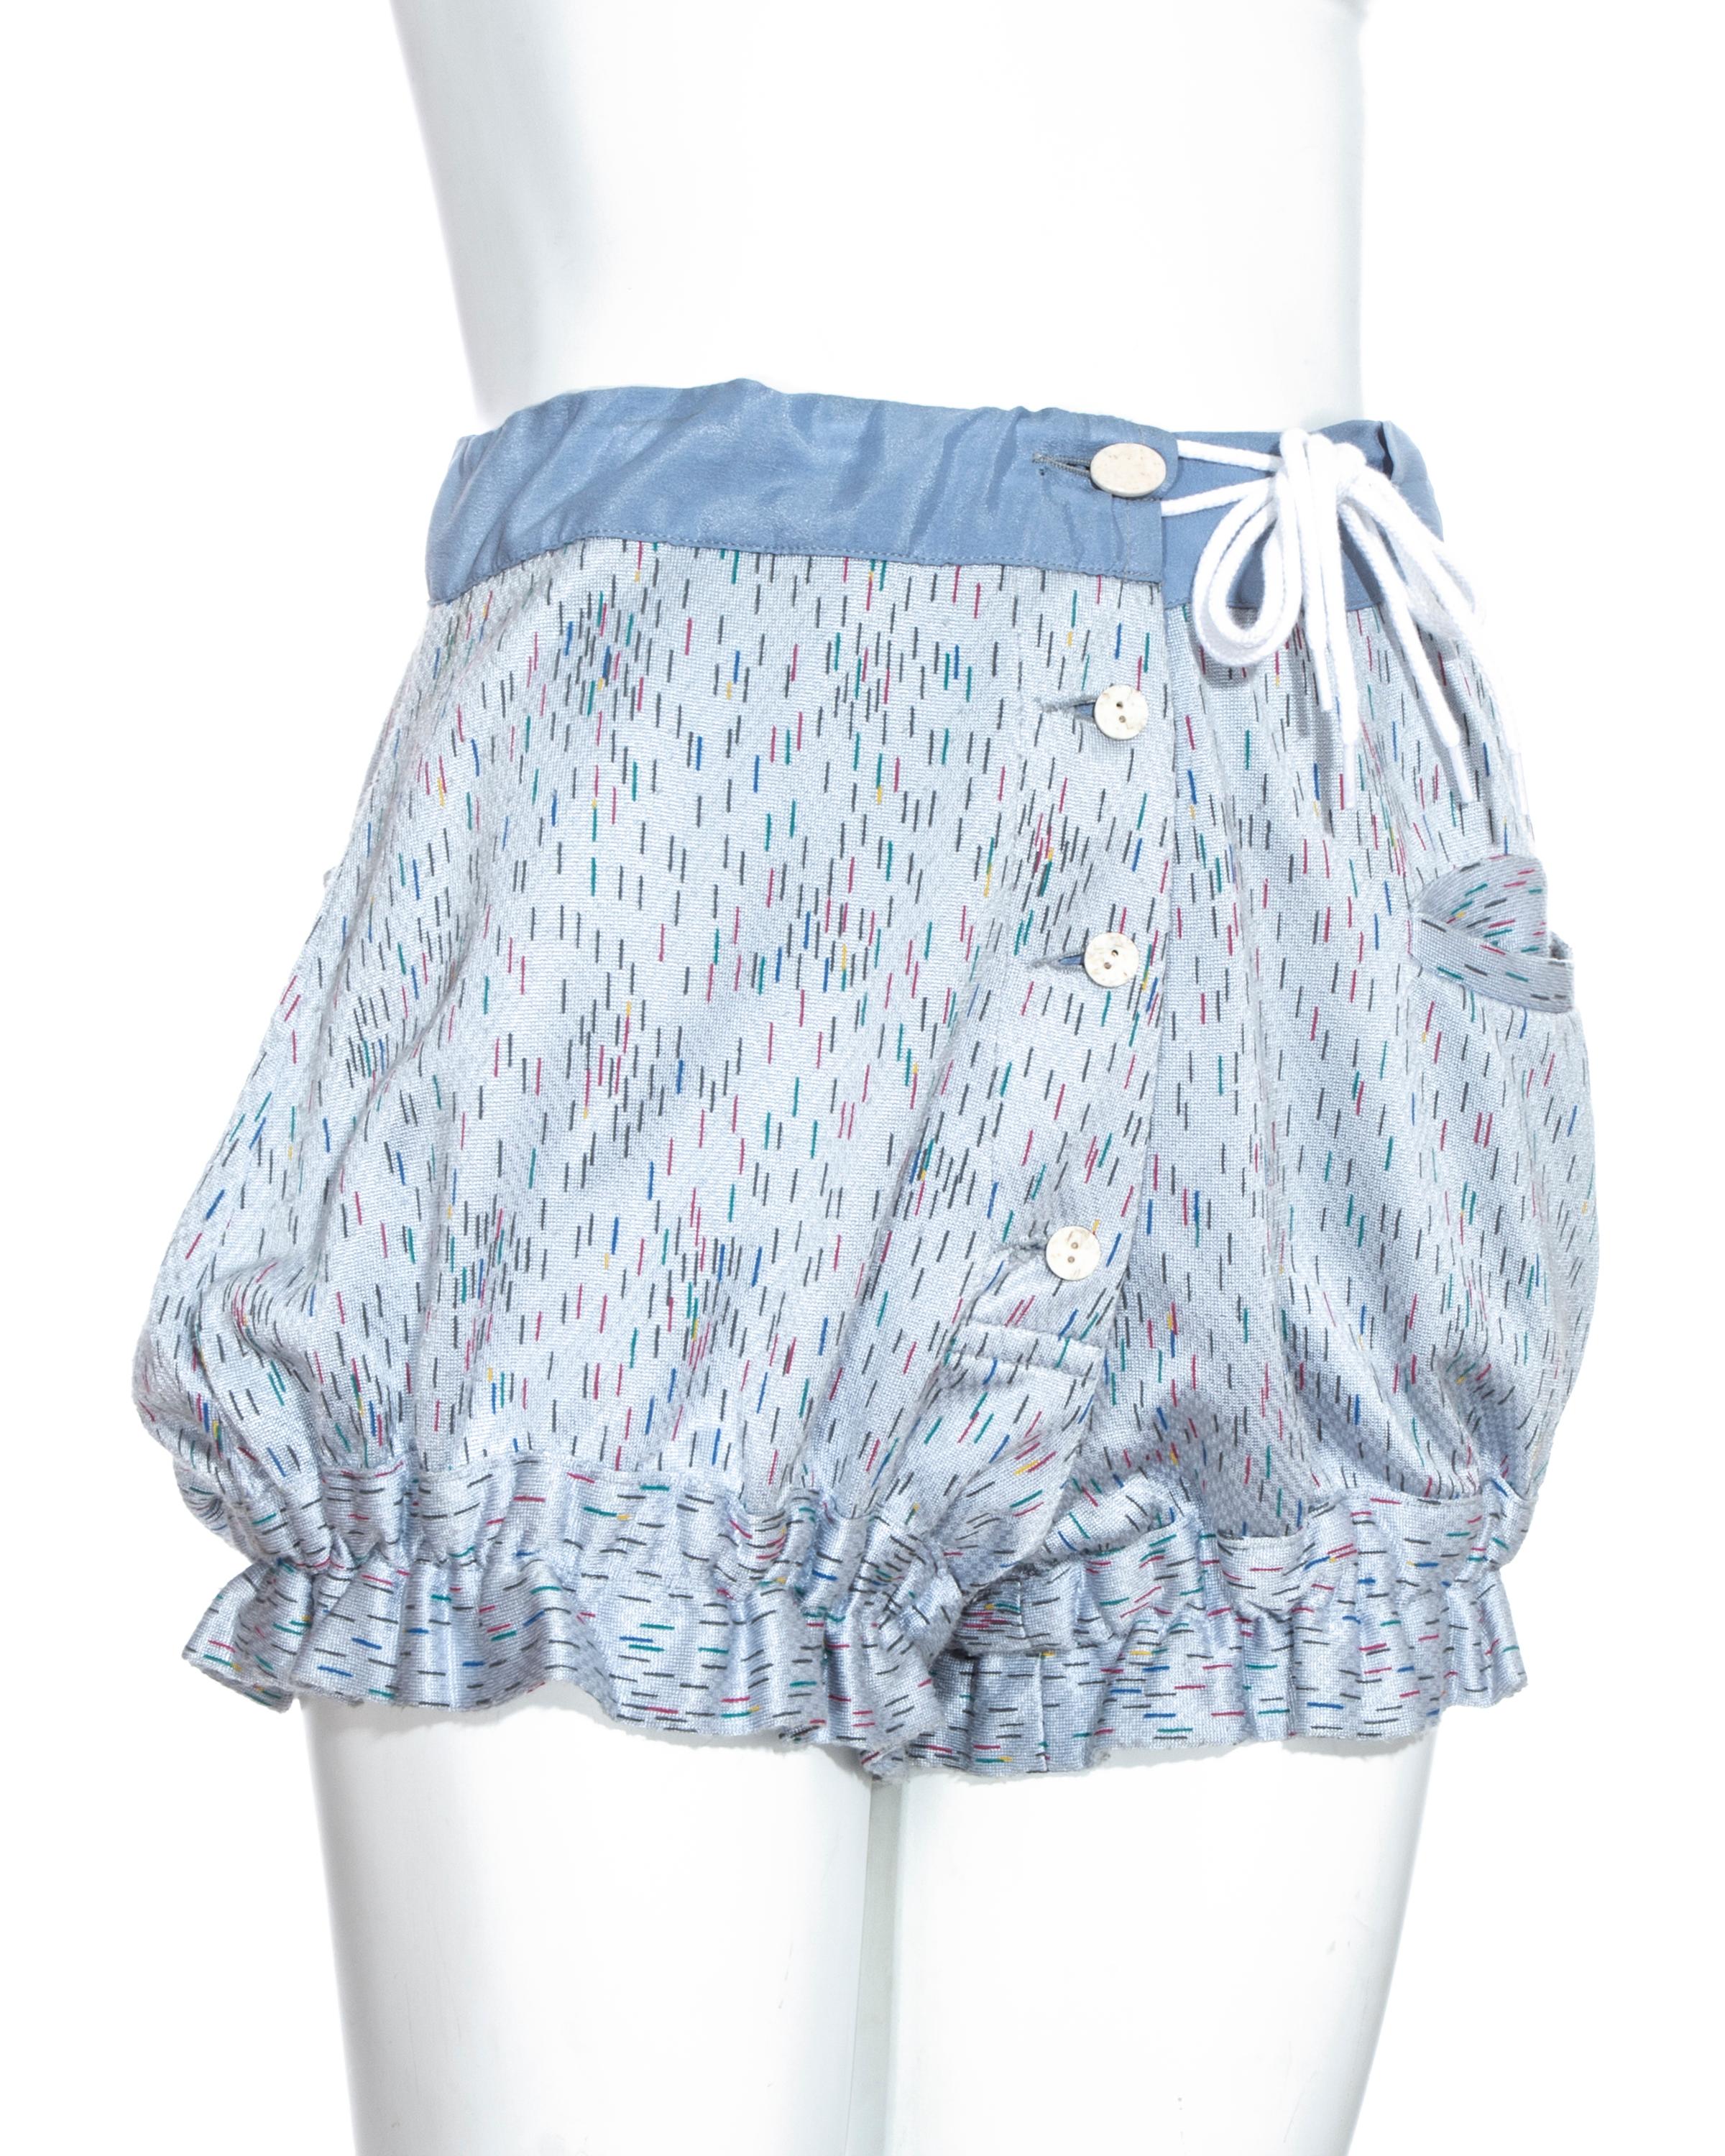 Vivienne Westwood blue printed button-down shorts with ruffled elasticated leg and drawstring waist with small pocket on left side

